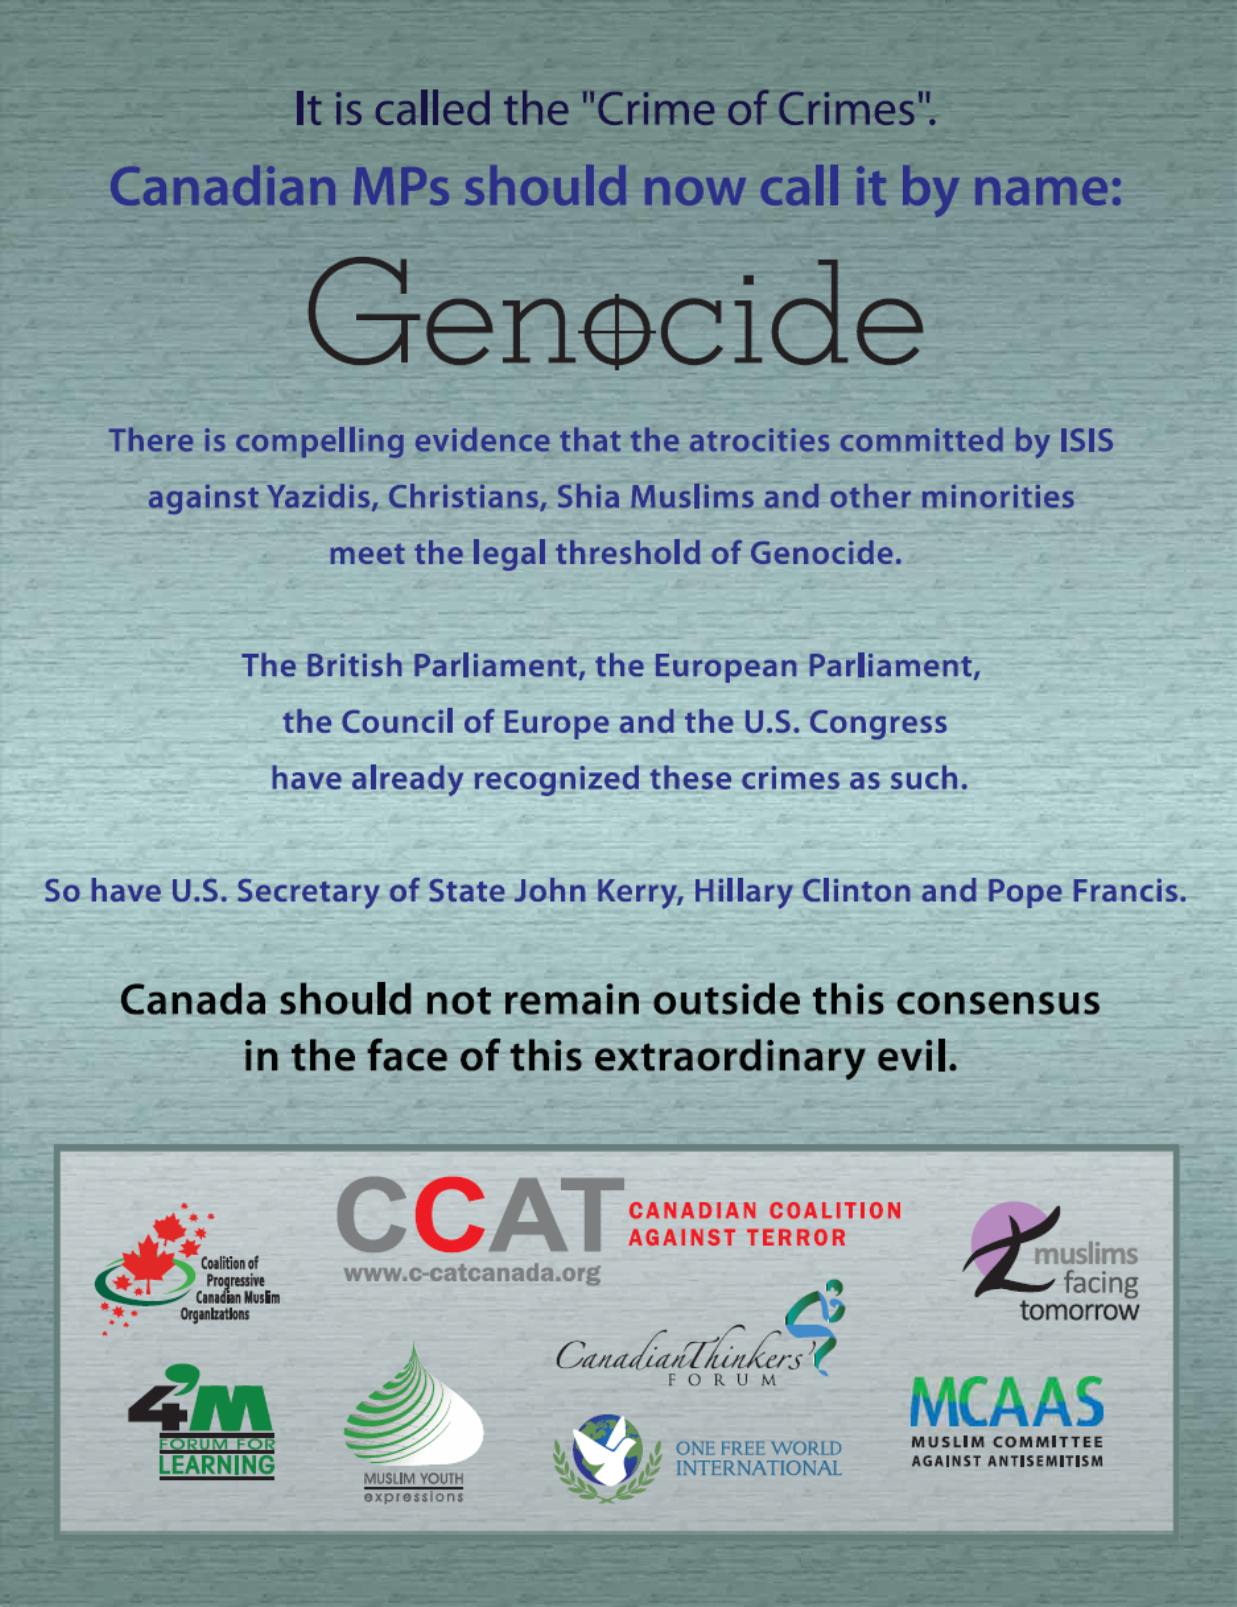 Full Page C-CAT Ad in the Hill Times in Favour of a motion to recognize as genocide the atrocities being committed by ISIS on Yazidis, Christians, Shia Muslims and other minorities.